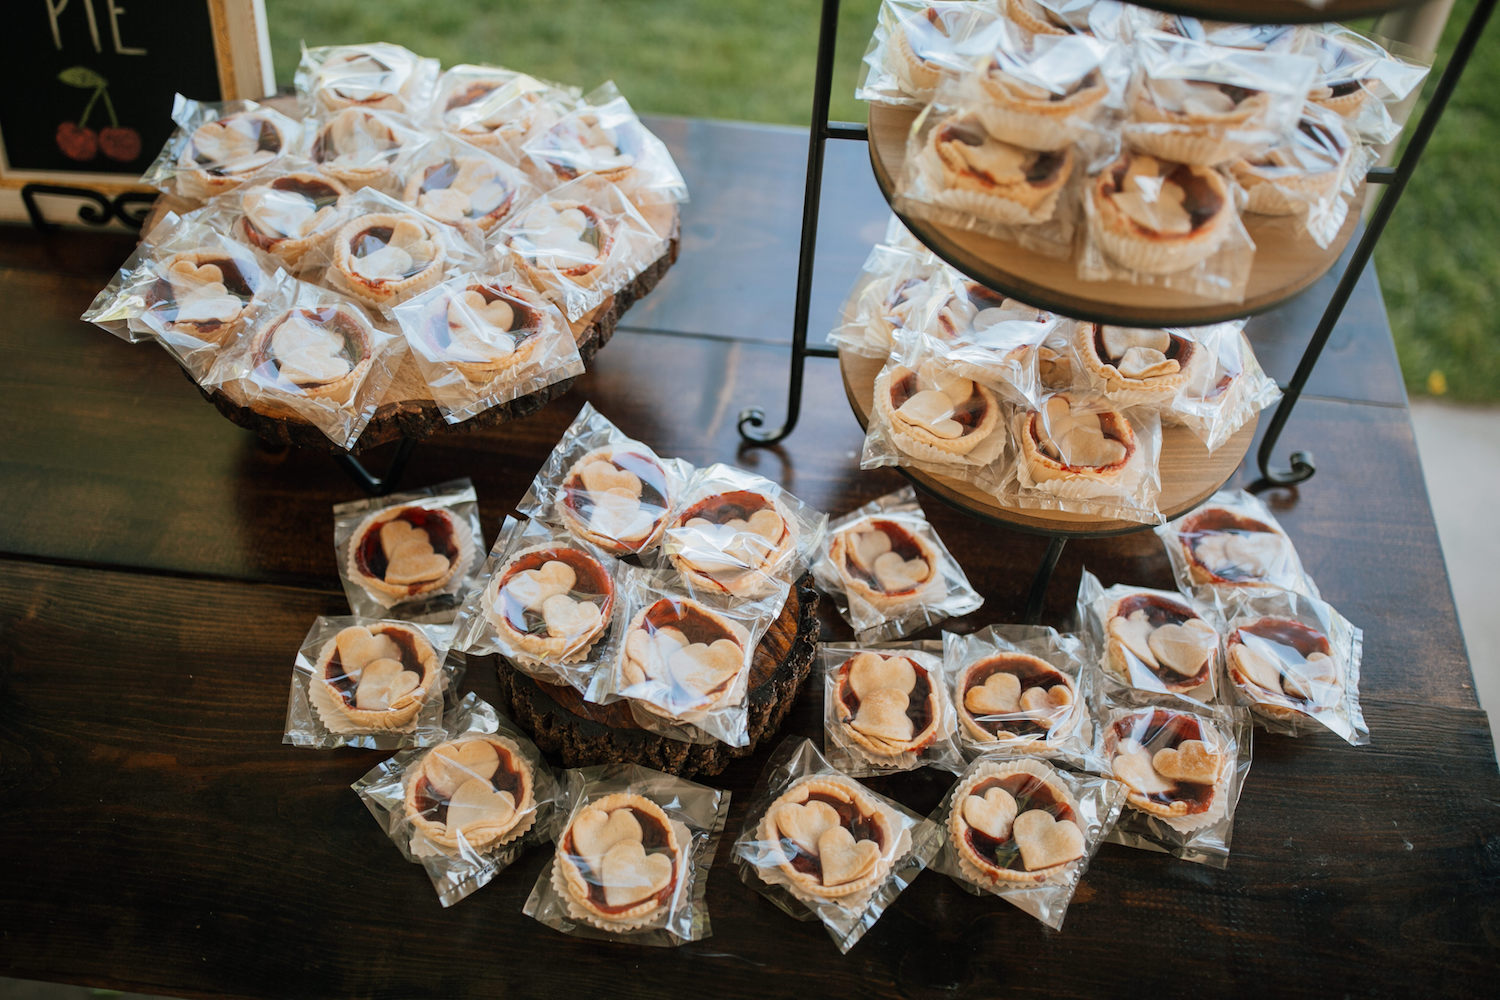 Individual wrapped pies